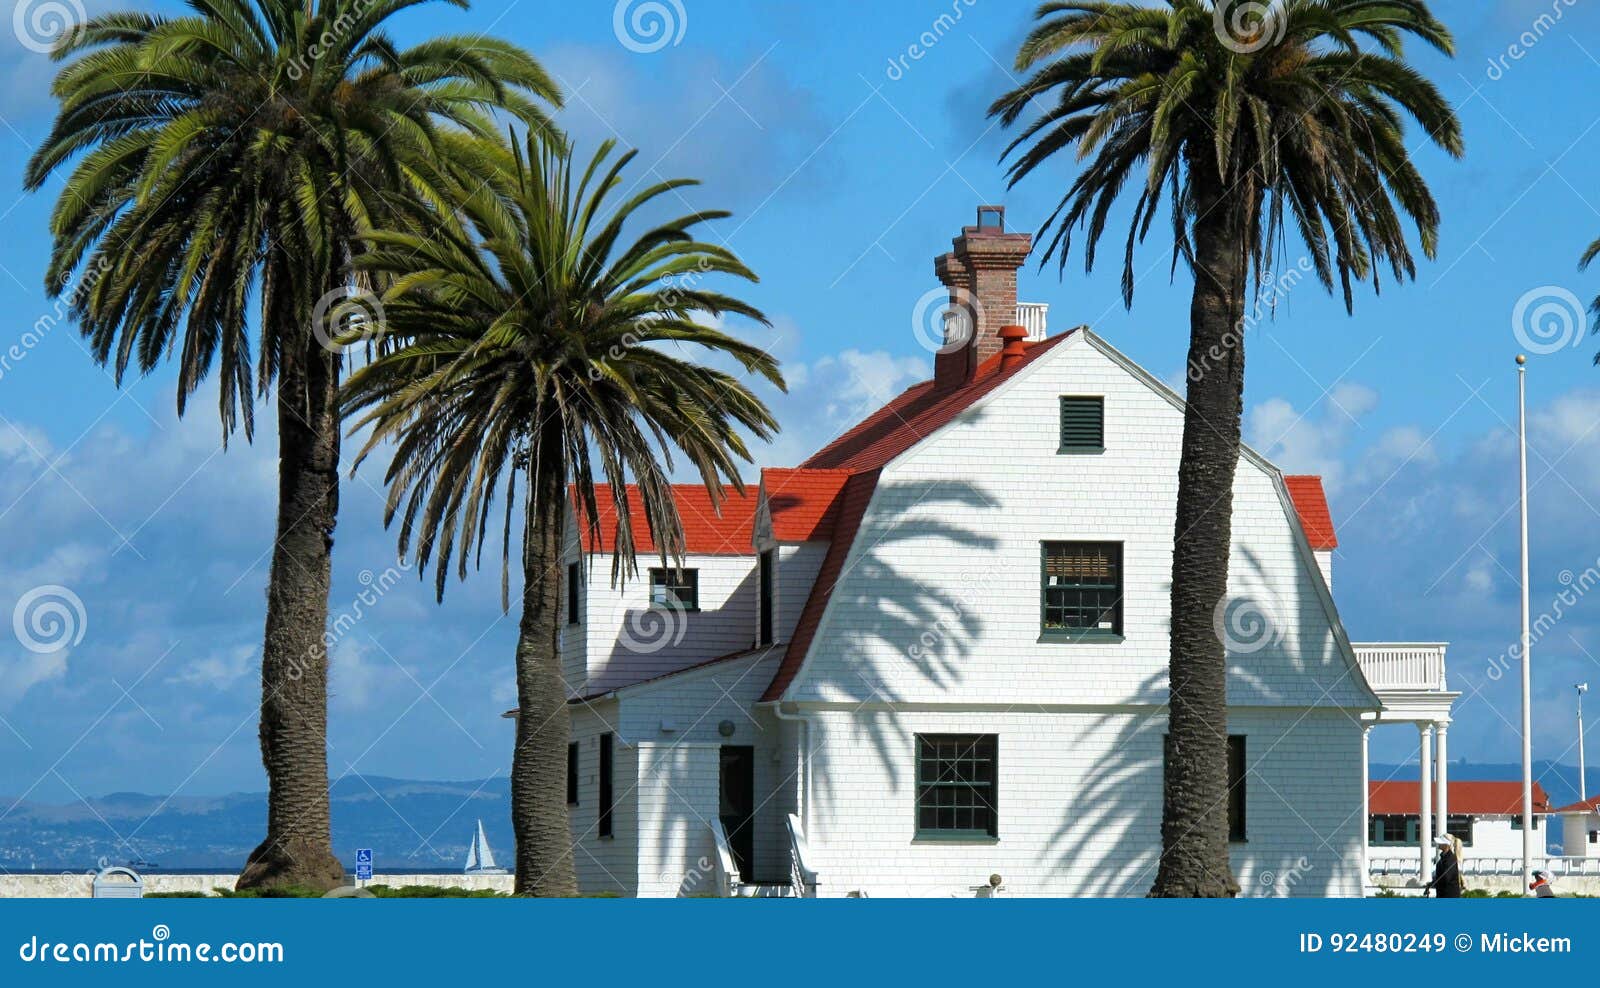 presidio waterfront building with red roof